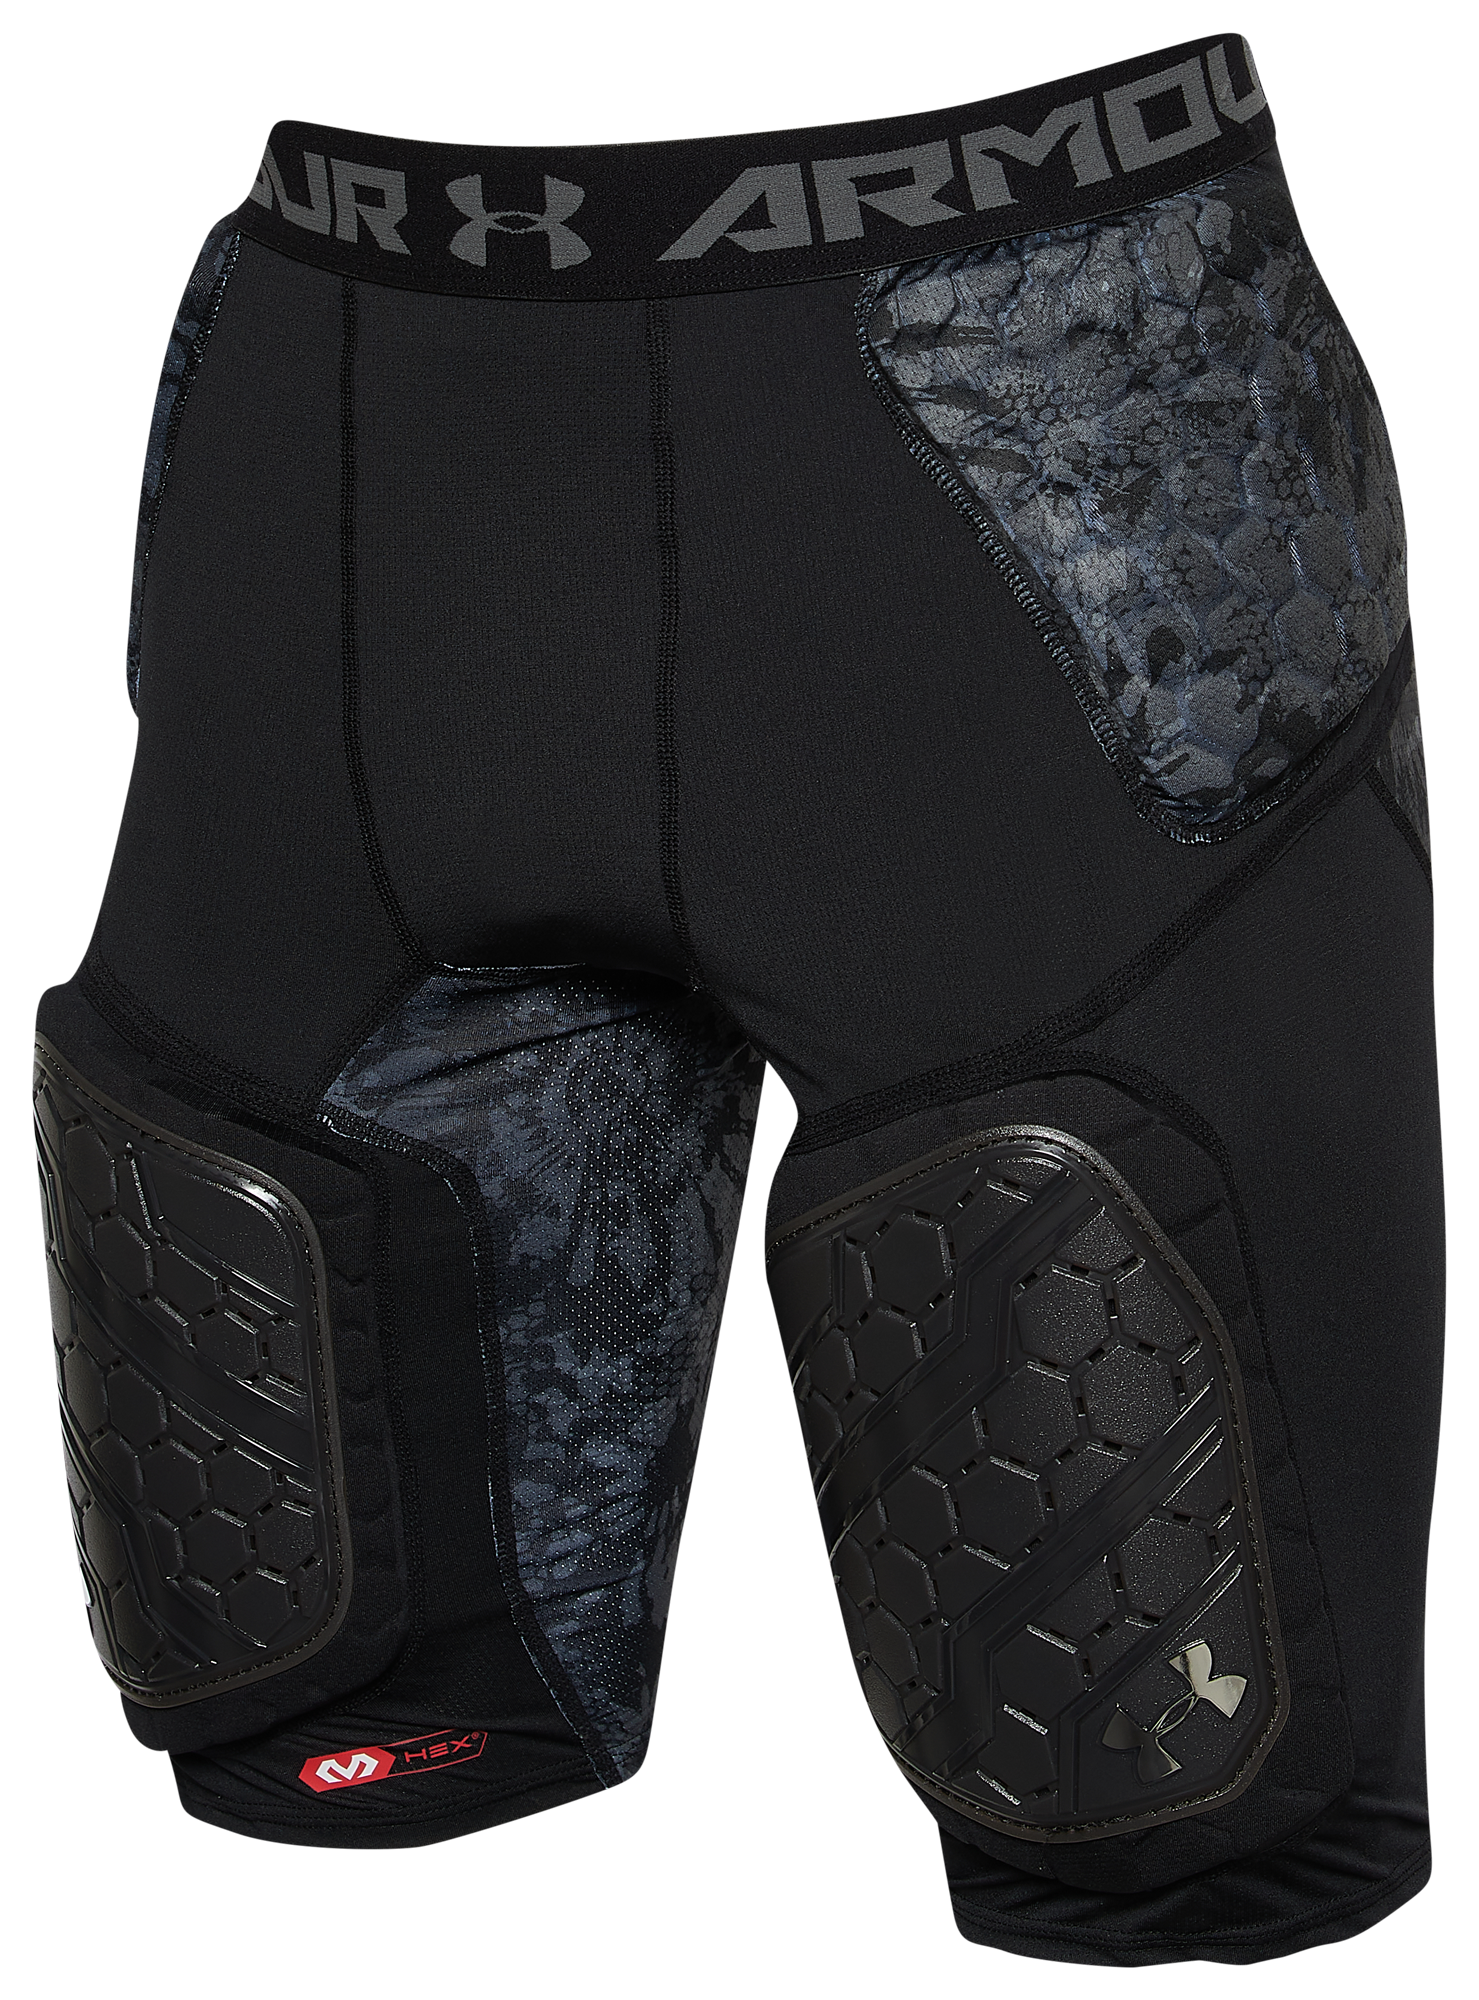 Under Armour Gameday Pro 5-Pad Football Compression Girdle/Shorts